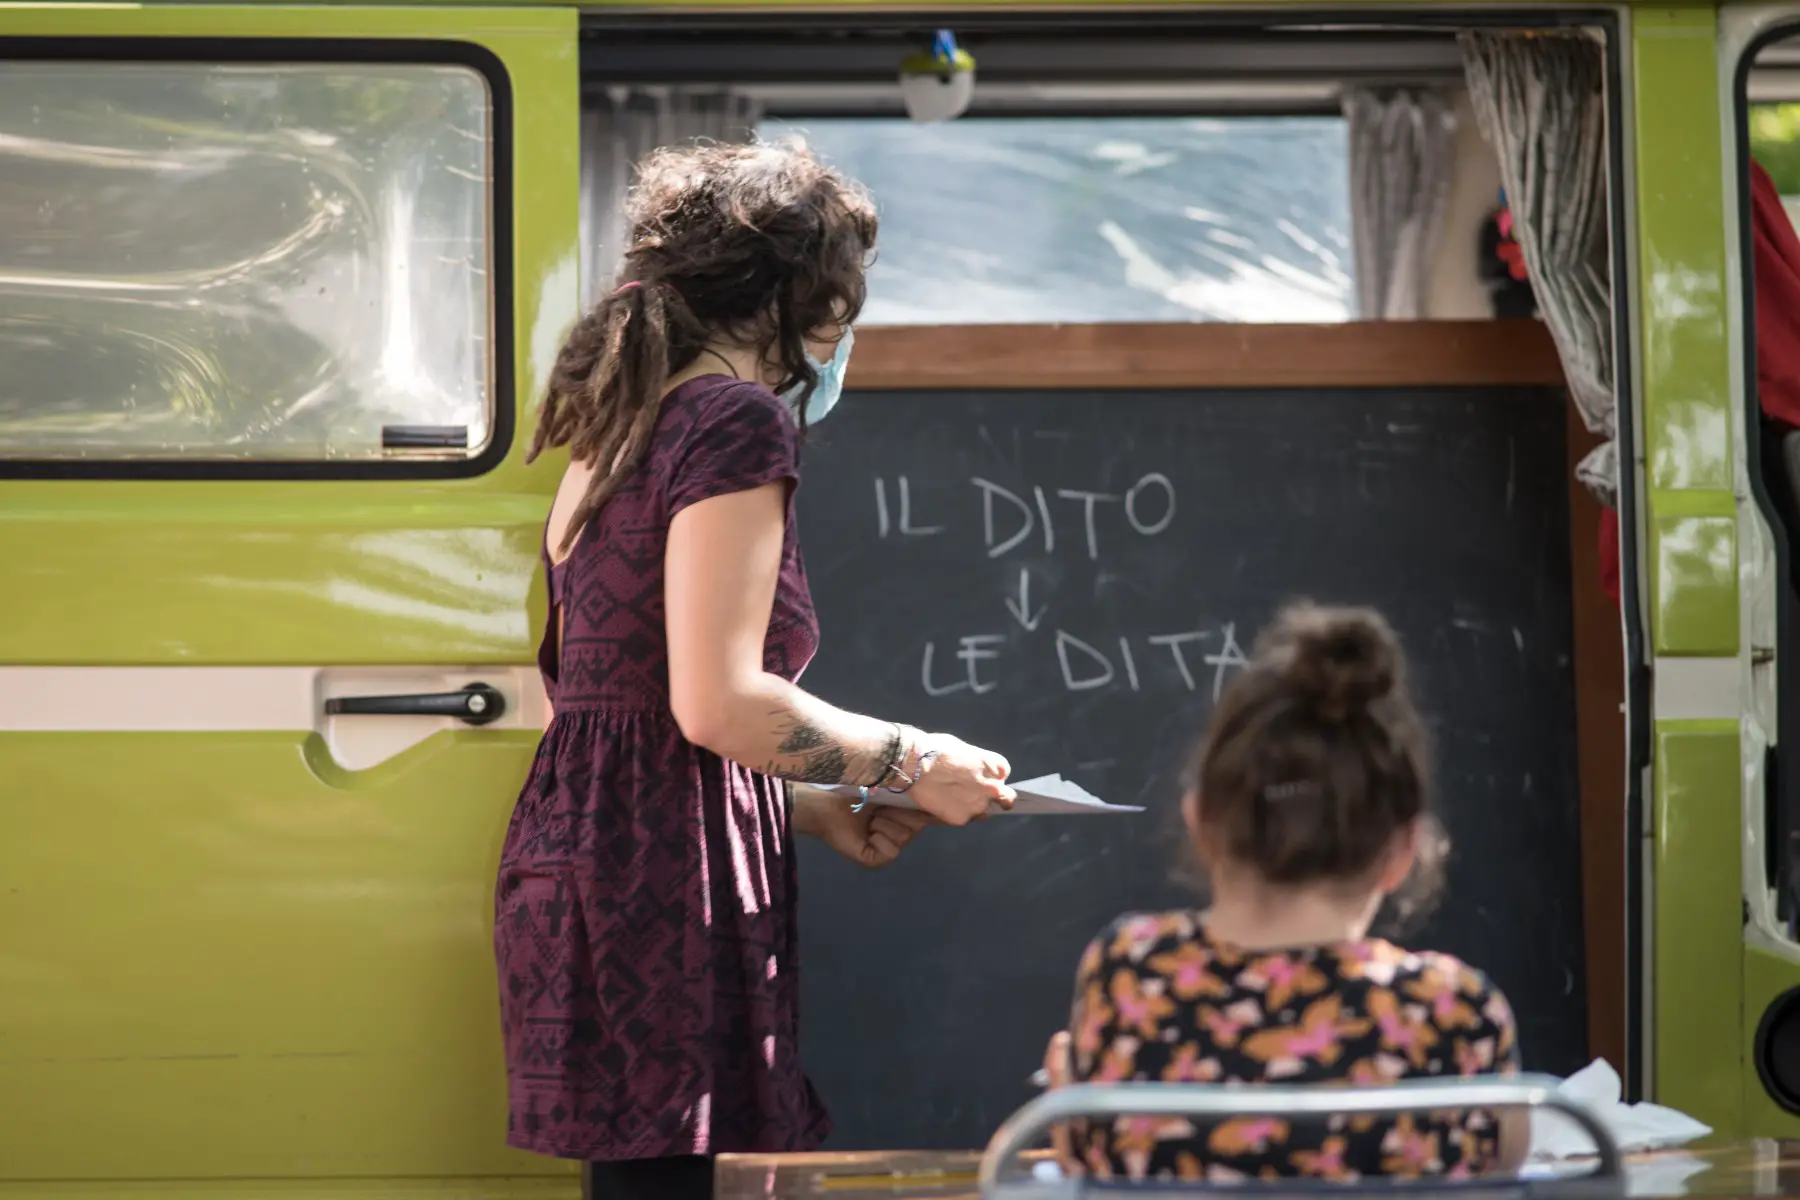 Woman teaching a child Italian from the back of a van.